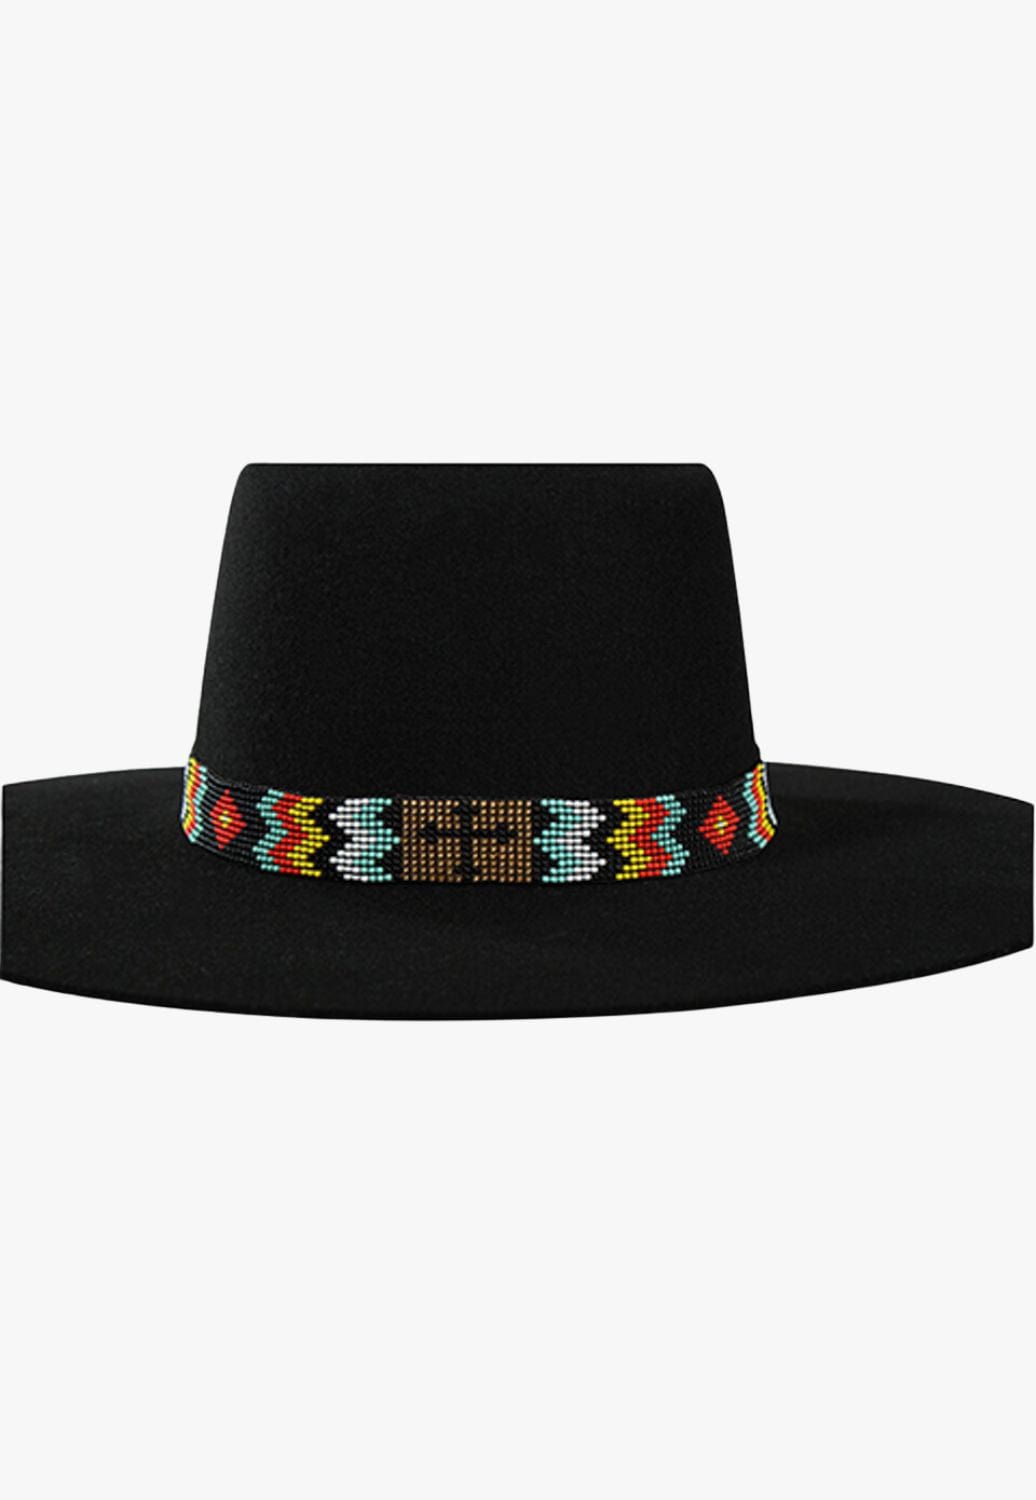 Twister ACCESSORIES-Hat Bands Multi Twister Beaded Cross Hatband